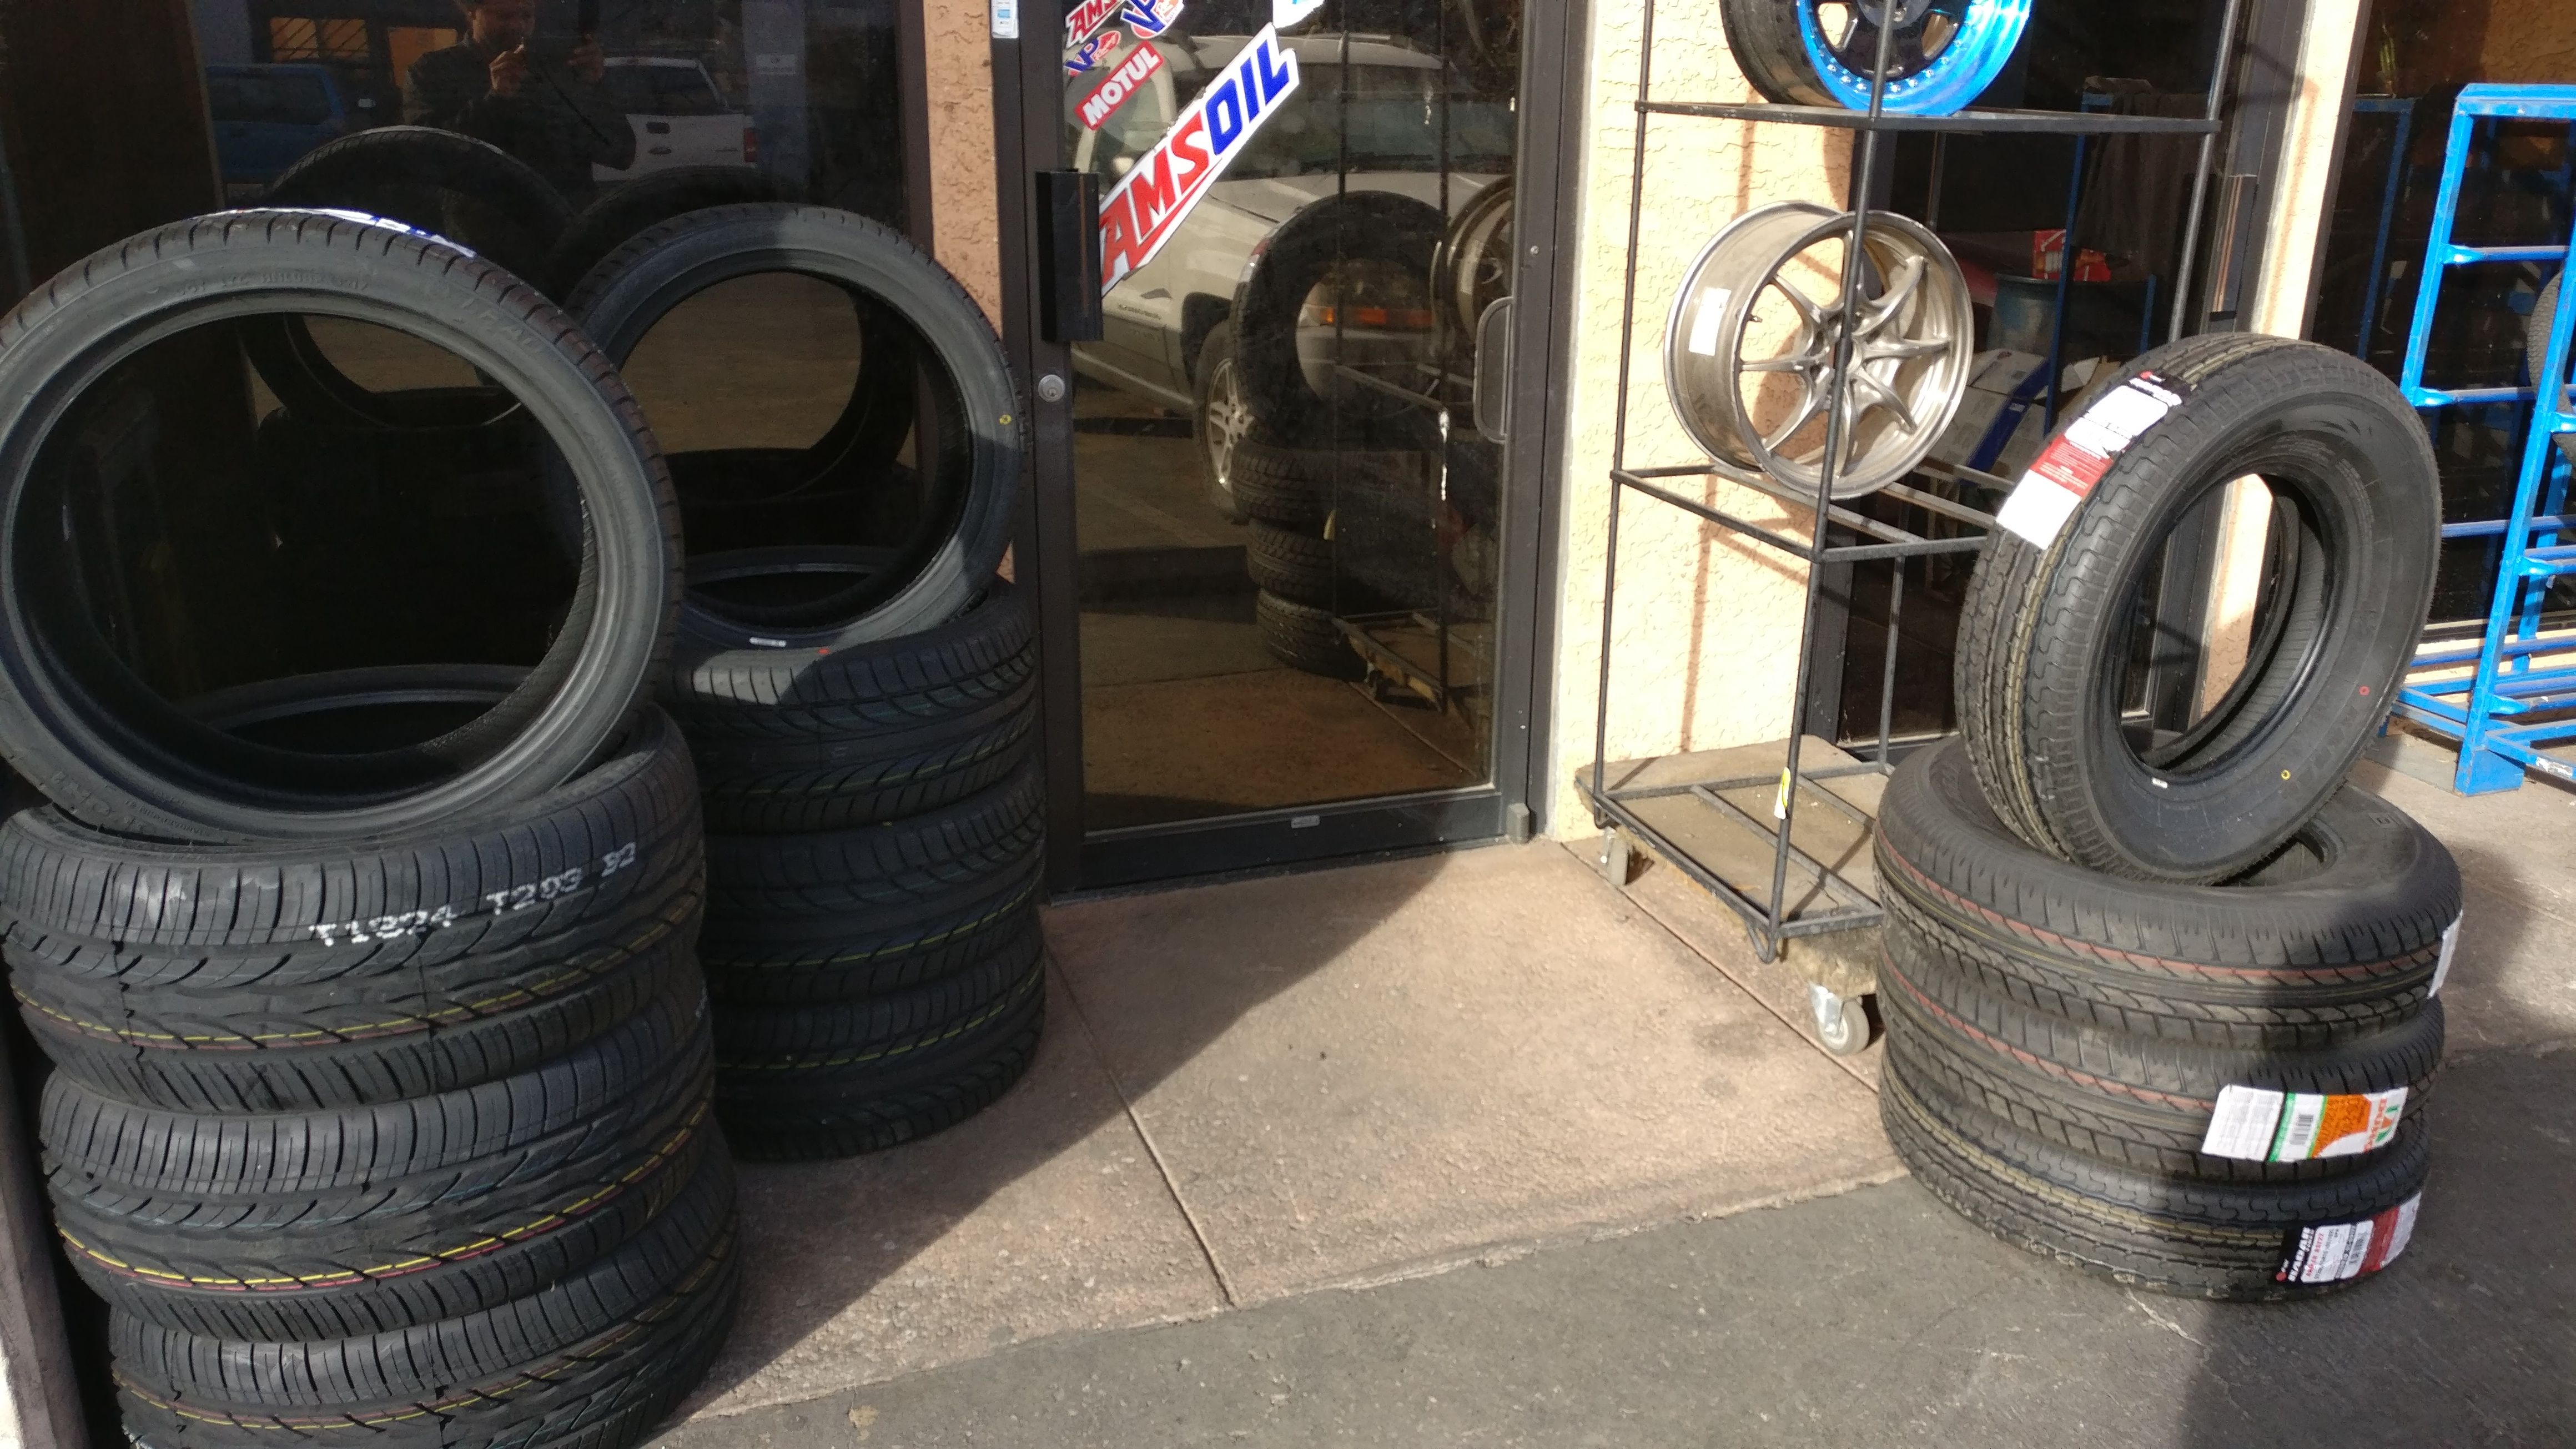 Tires of all sizes new. Auto/truck/trailer